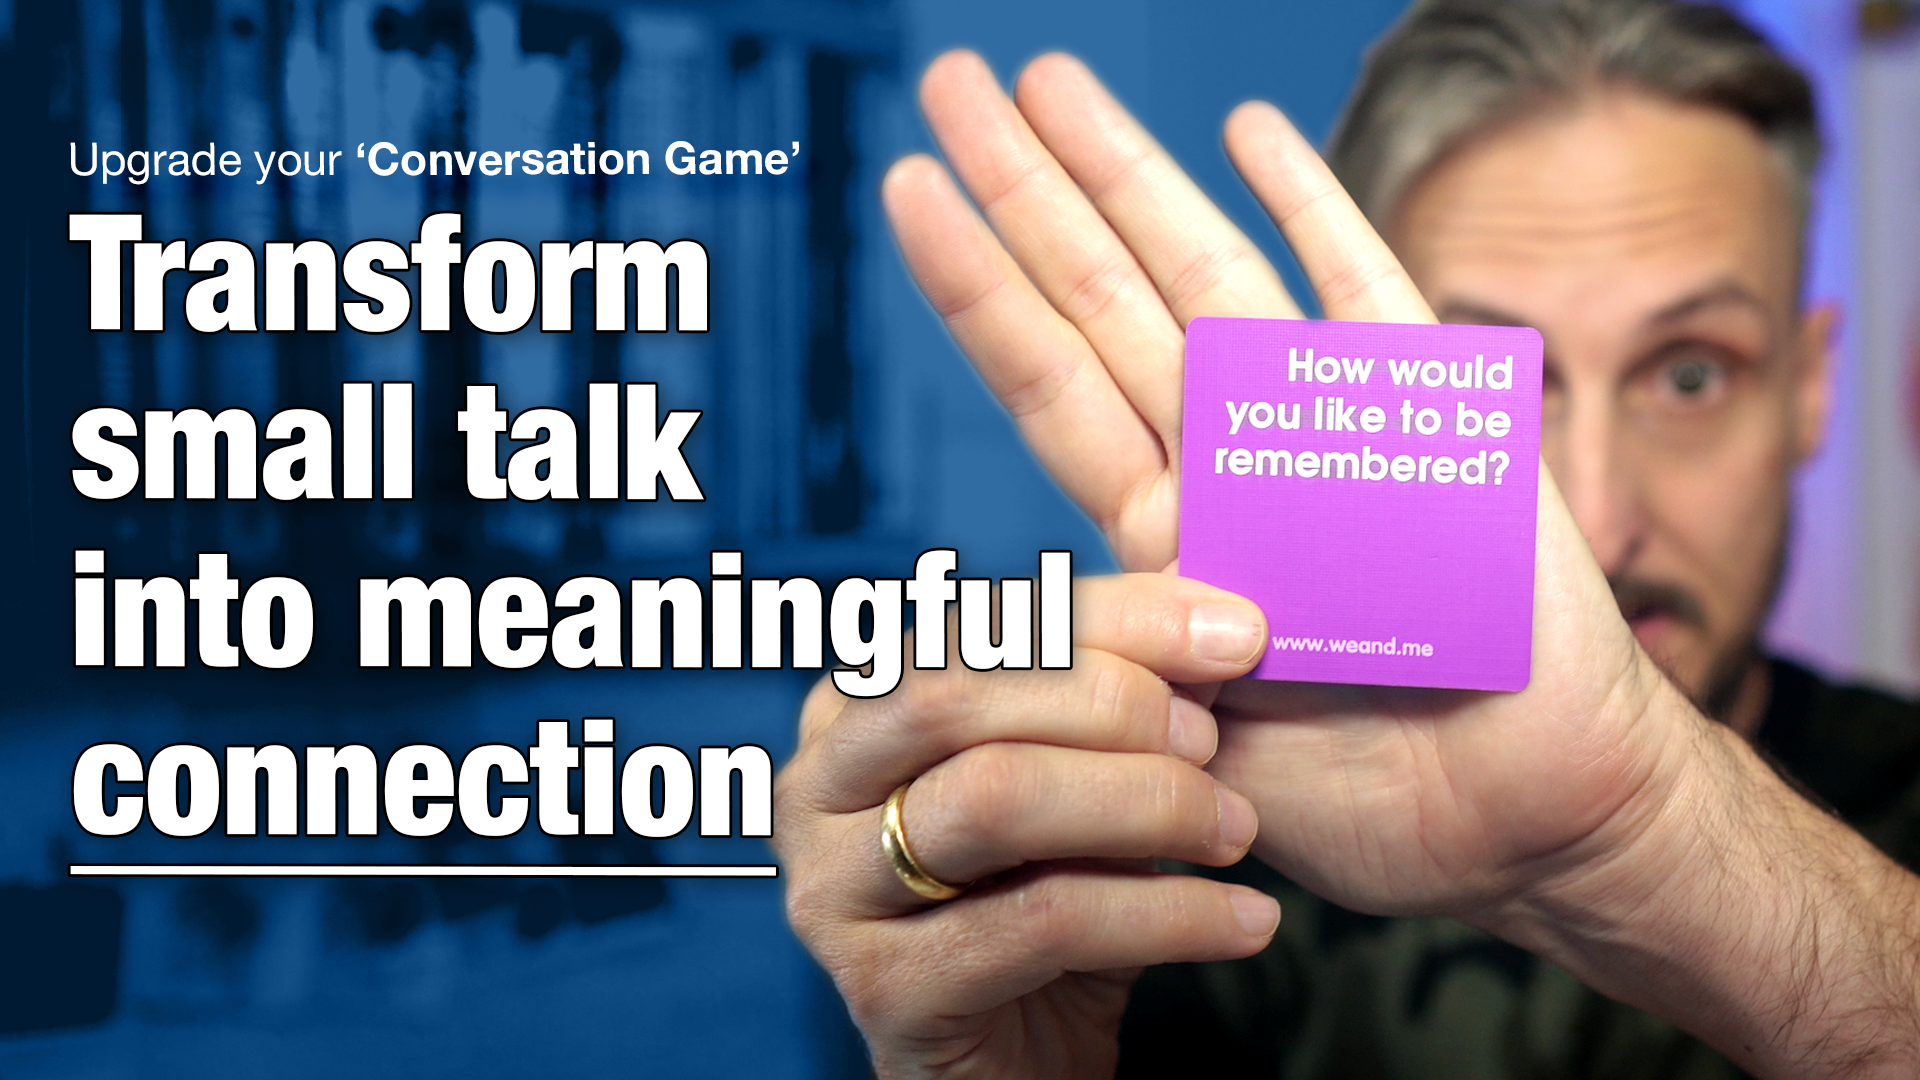 Upgrade your ‘Conversation Game’: Transform small talk into meaningful connection